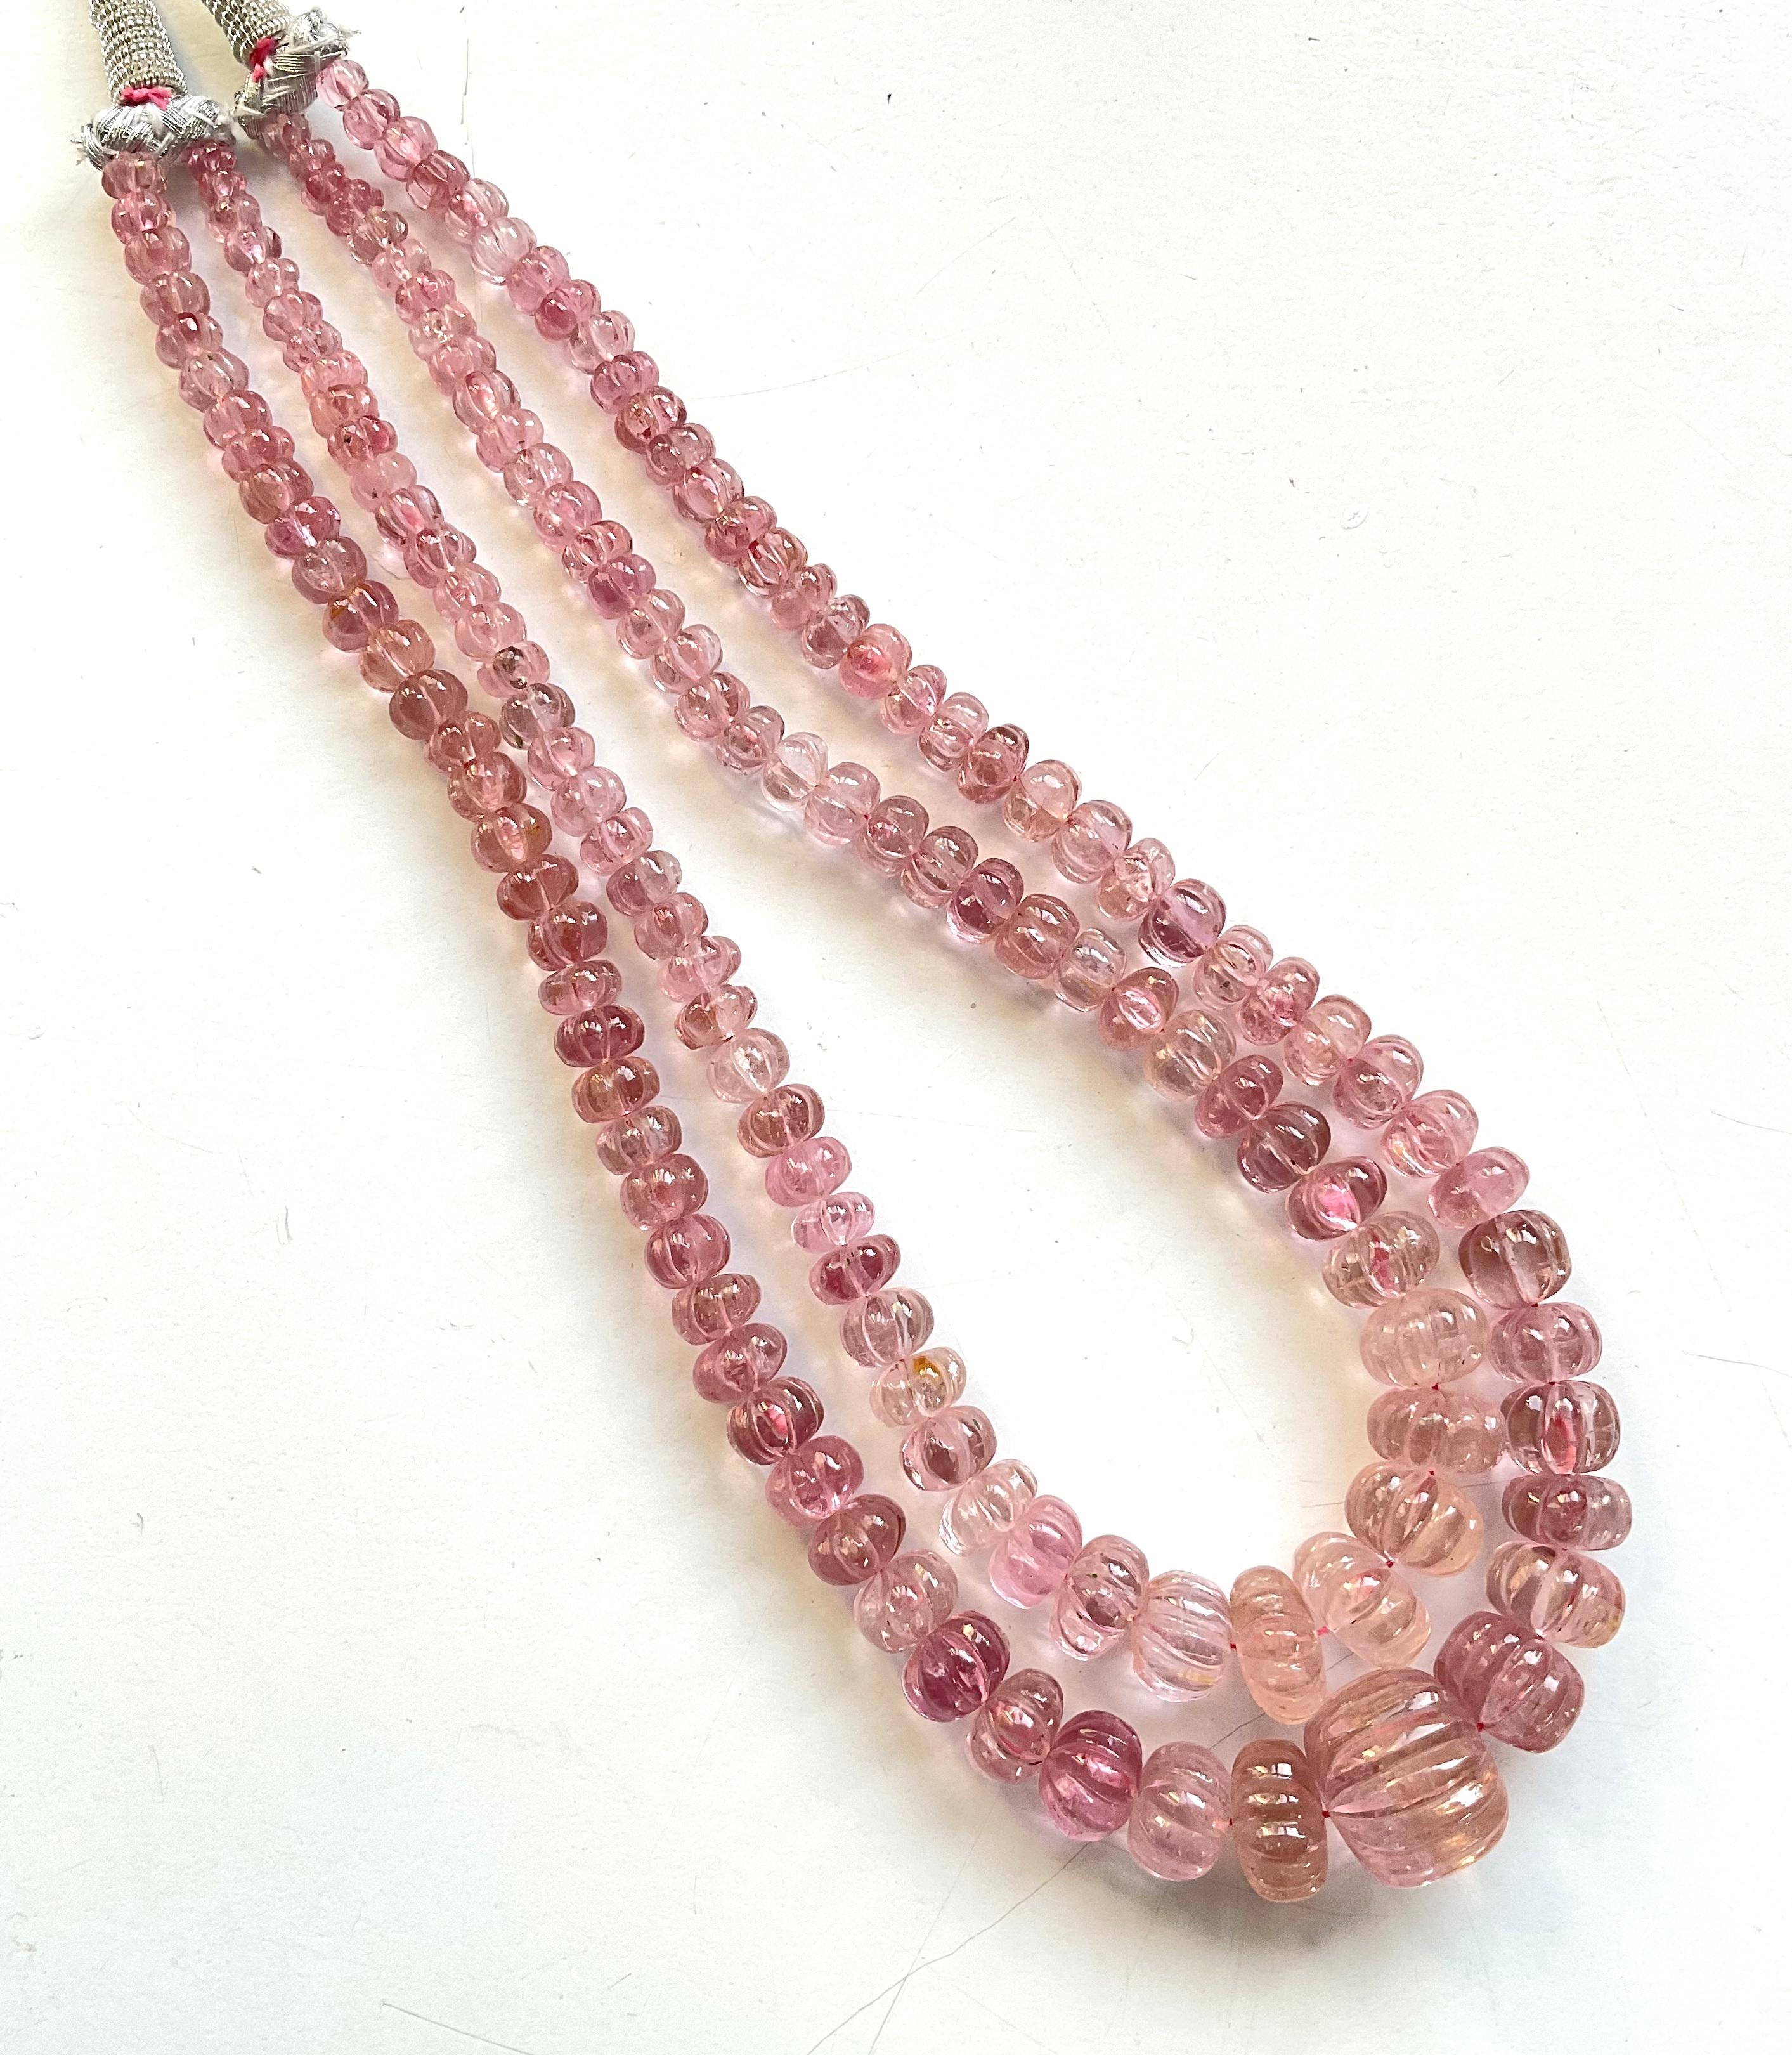 396.95 Carats pink Tourmaline carved melon beads necklace Jewelry Natural Gem

Gemstone - Tourmaline
Weight -  396.95 Carats
Strand - 2
Size - 5 To 16 MM
Shape - melon beads

